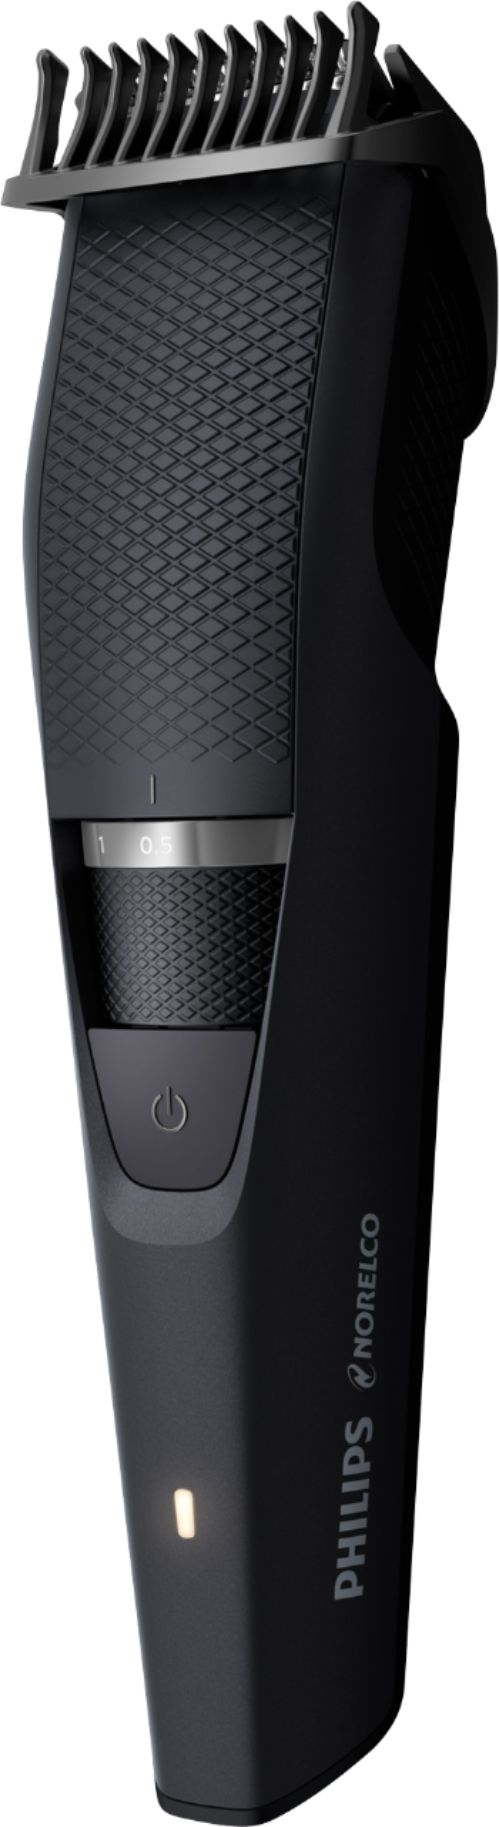 Left View: Philips Norelco - 3000 Series Hair Trimmer - Black